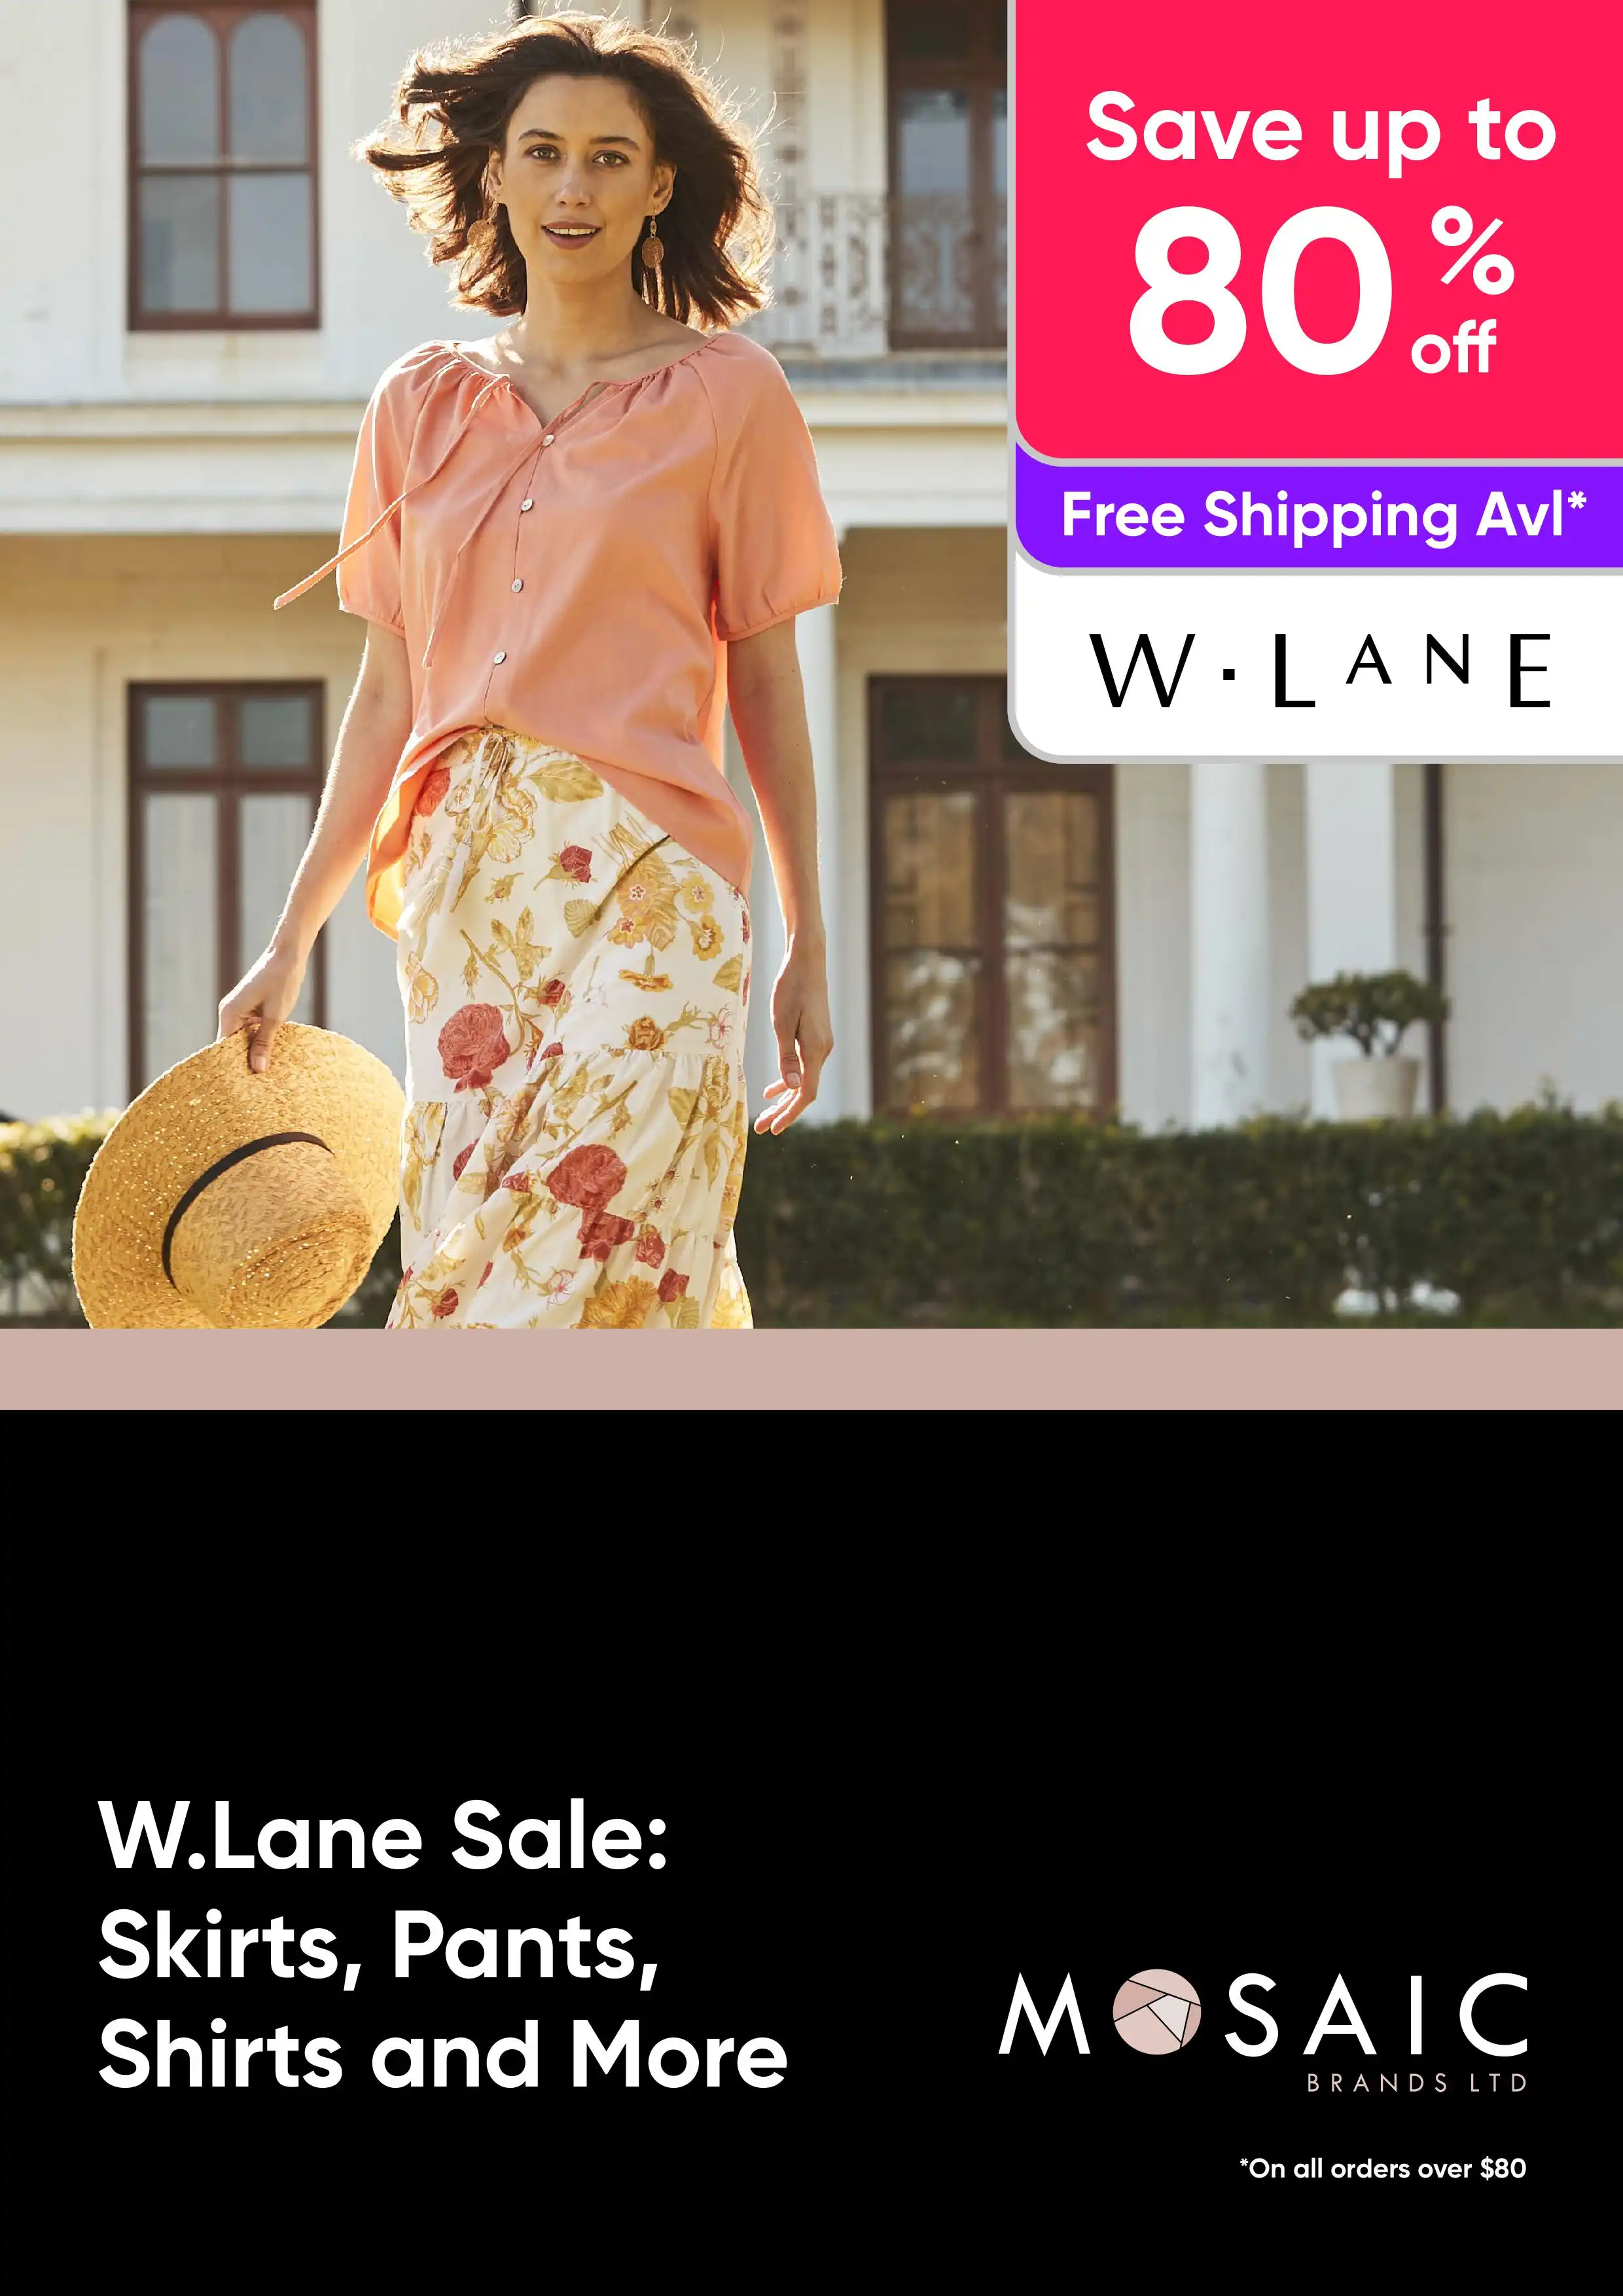 W.Lane Sale - Skirts, Pants, Shirts and More - up to 80% off